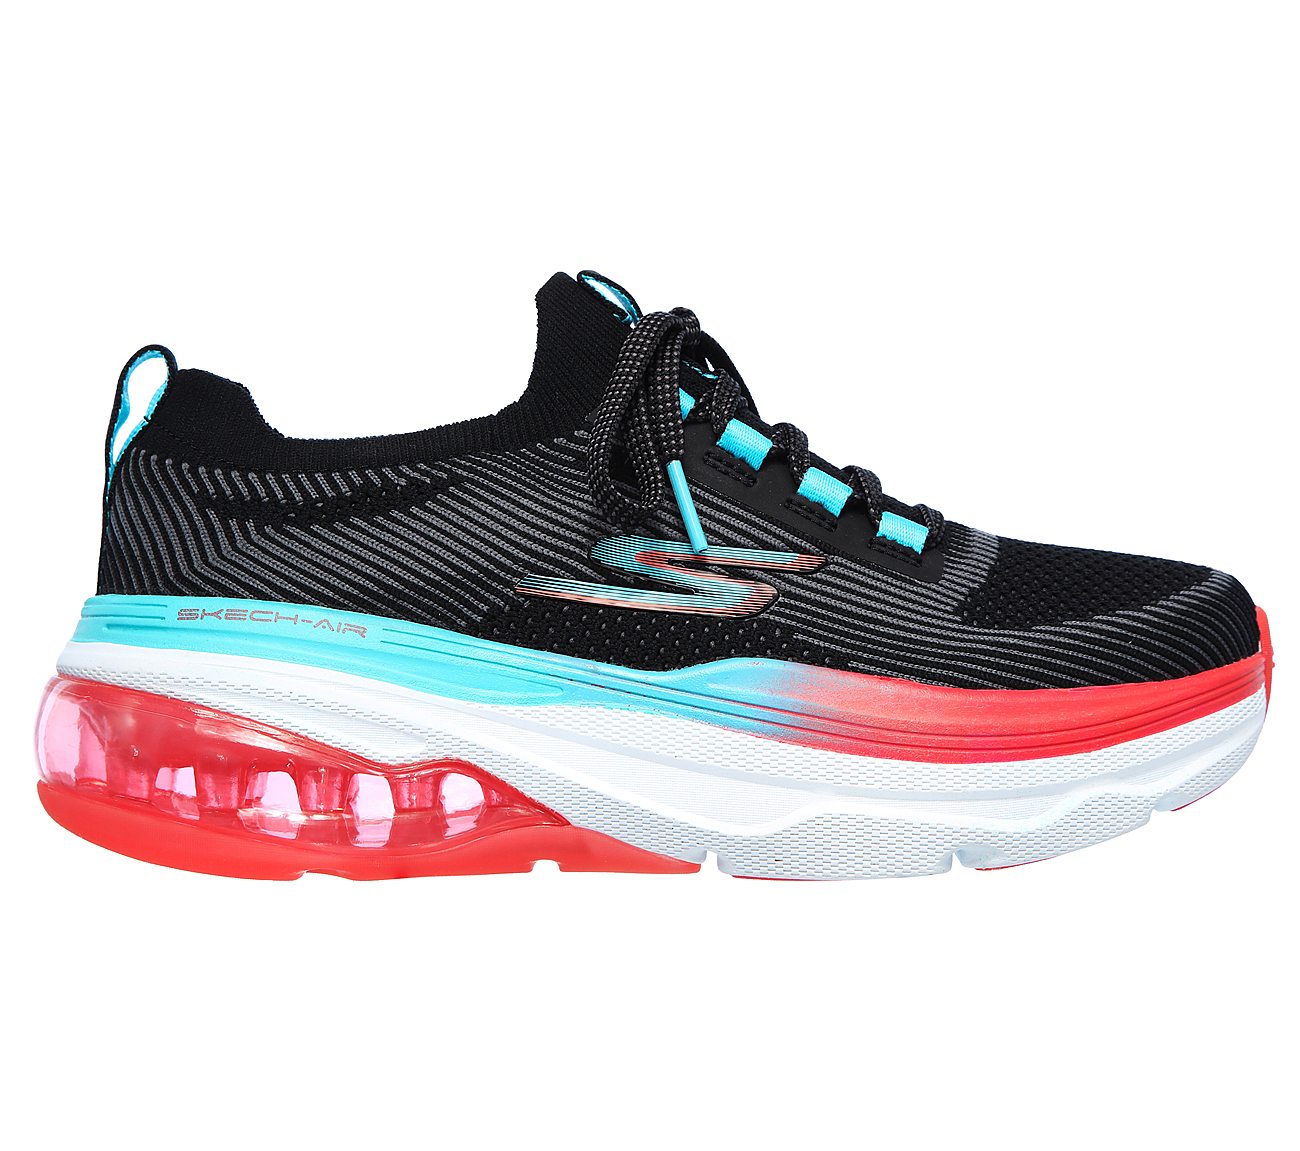 Tycoon Skechers Max Cushioning Shoes